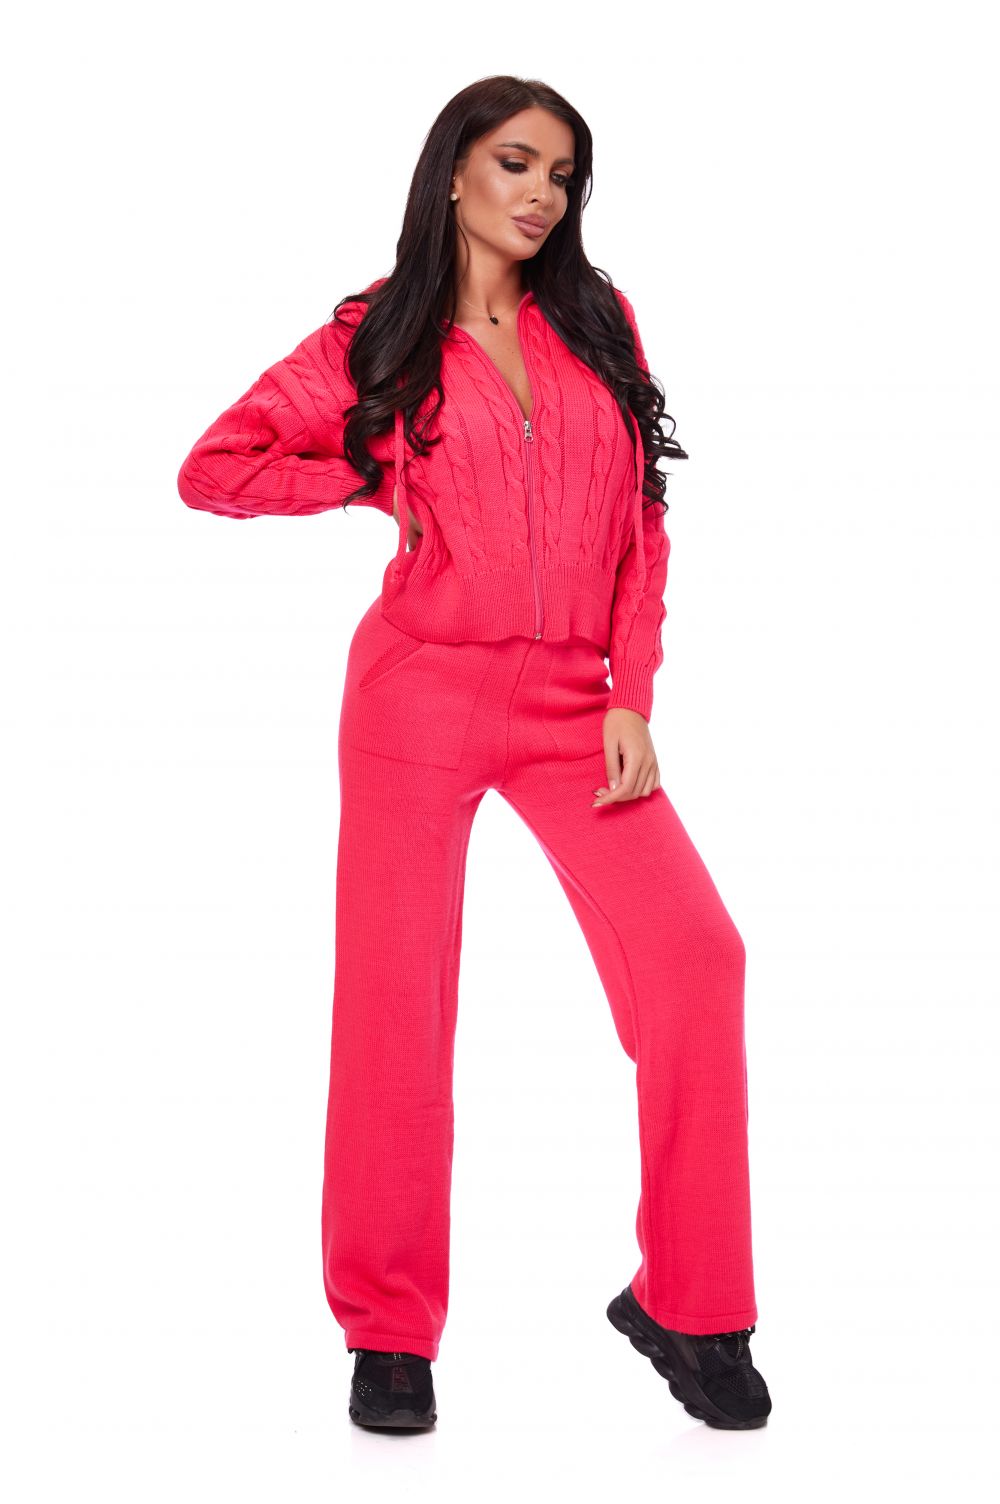 Women's casual pink Pesce Bogas training suit